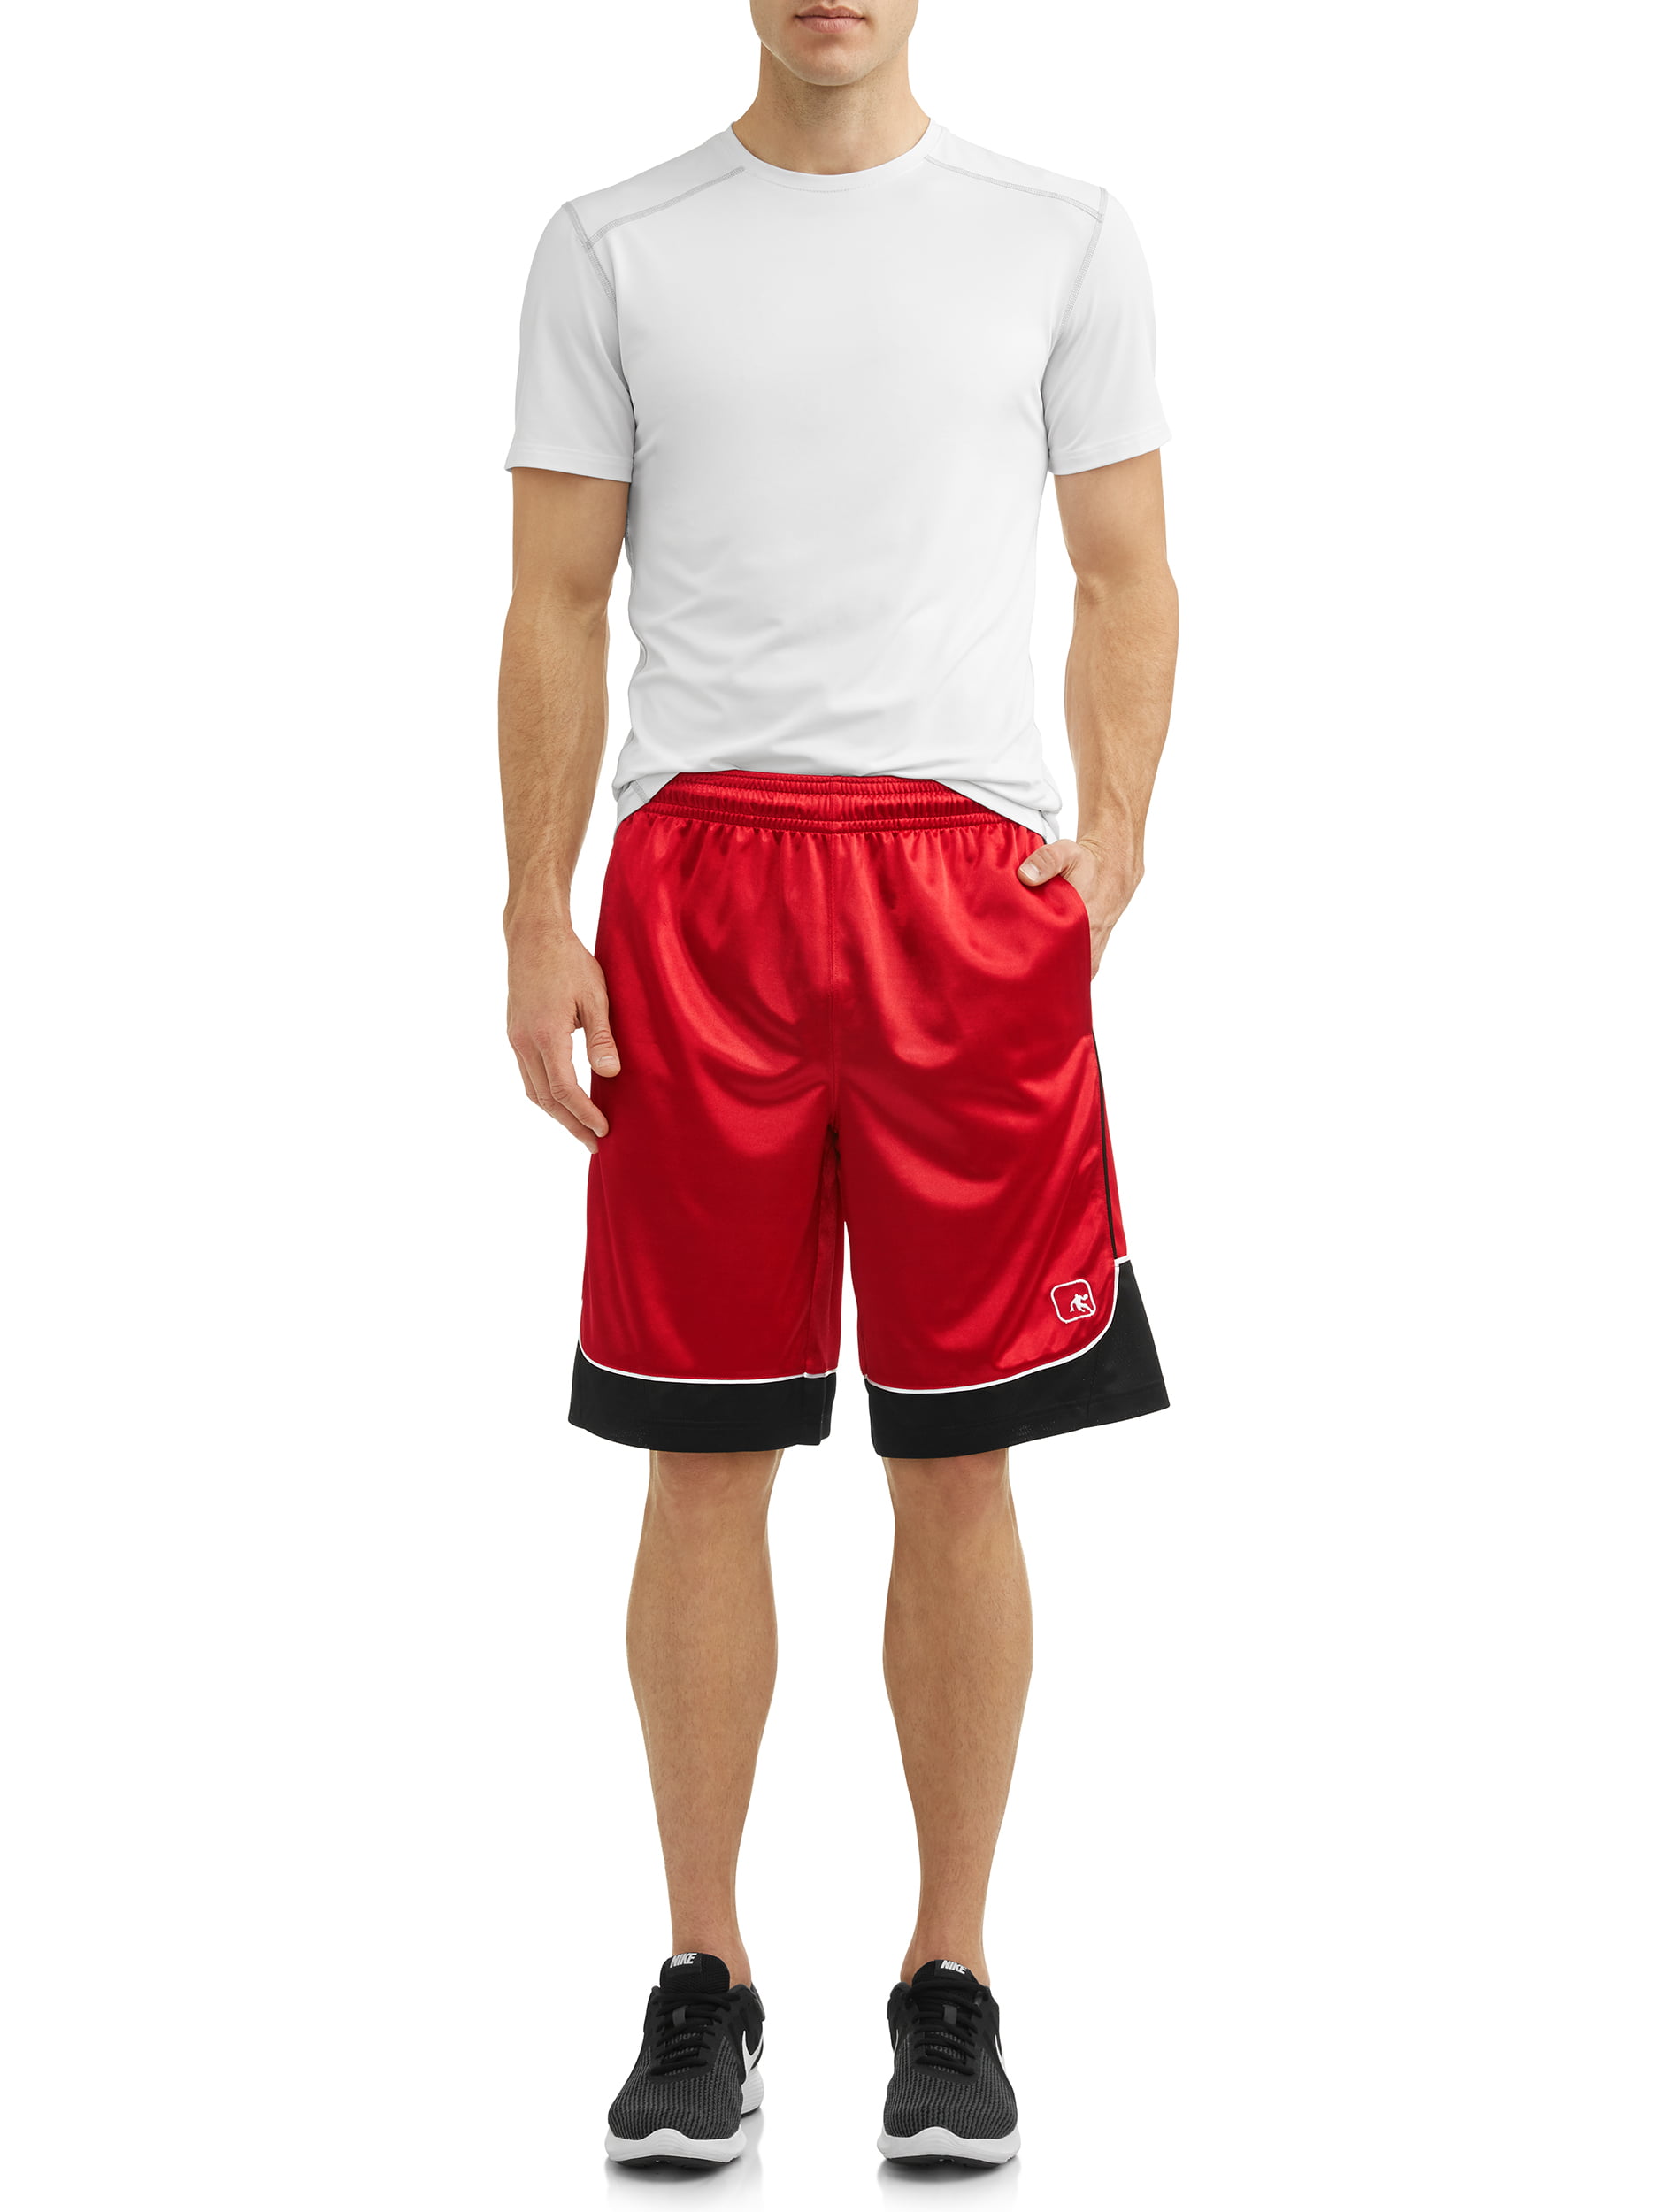 AND1 Men's Colorblock Basketball Shorts, Up to 5XL 